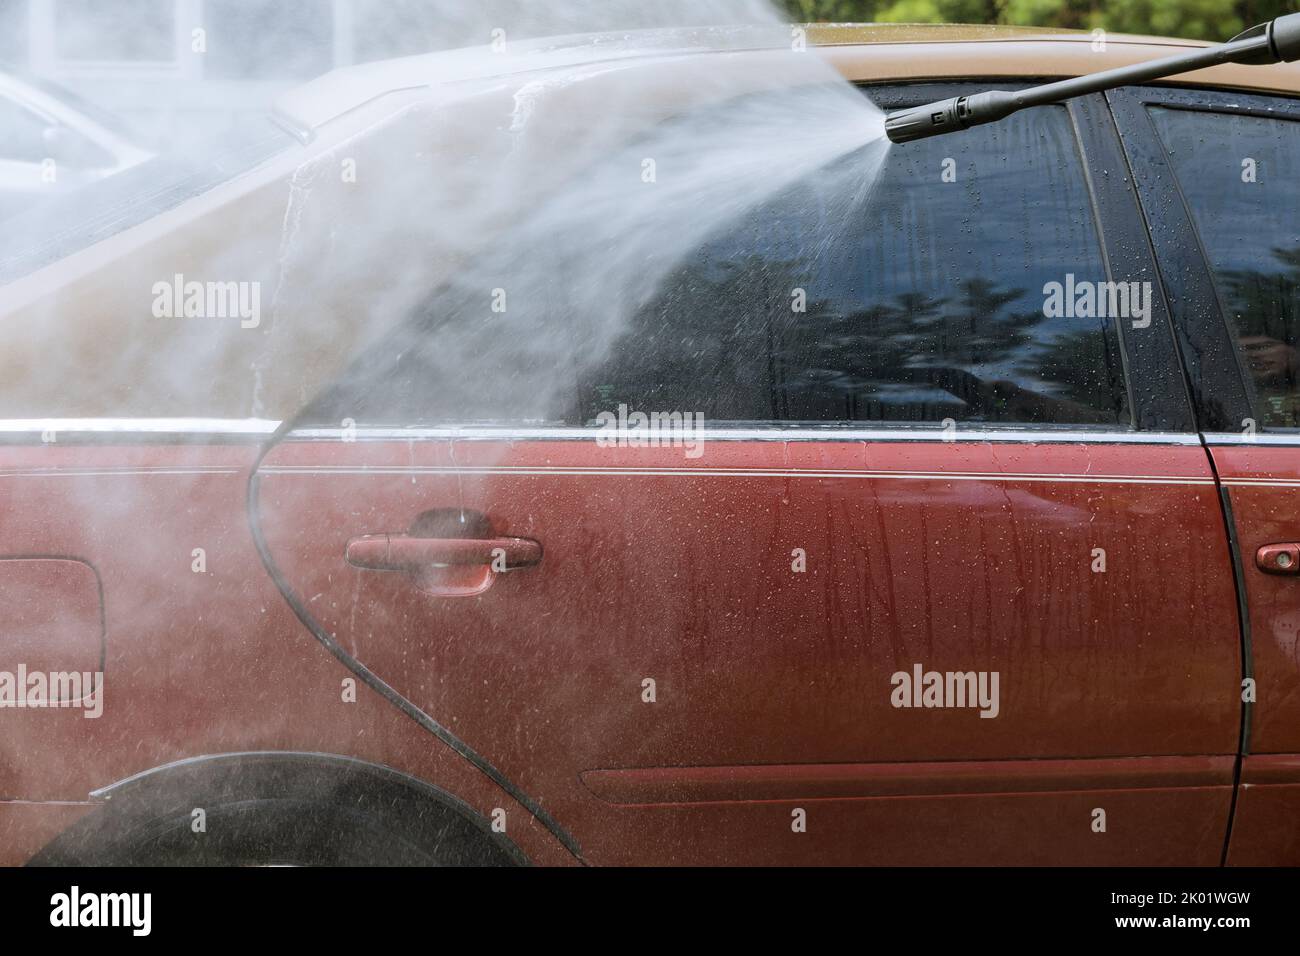 During the process of washing his car, a worker sprays high-pressure jets of water onto his car while simultaneously cleaning it Stock Photo